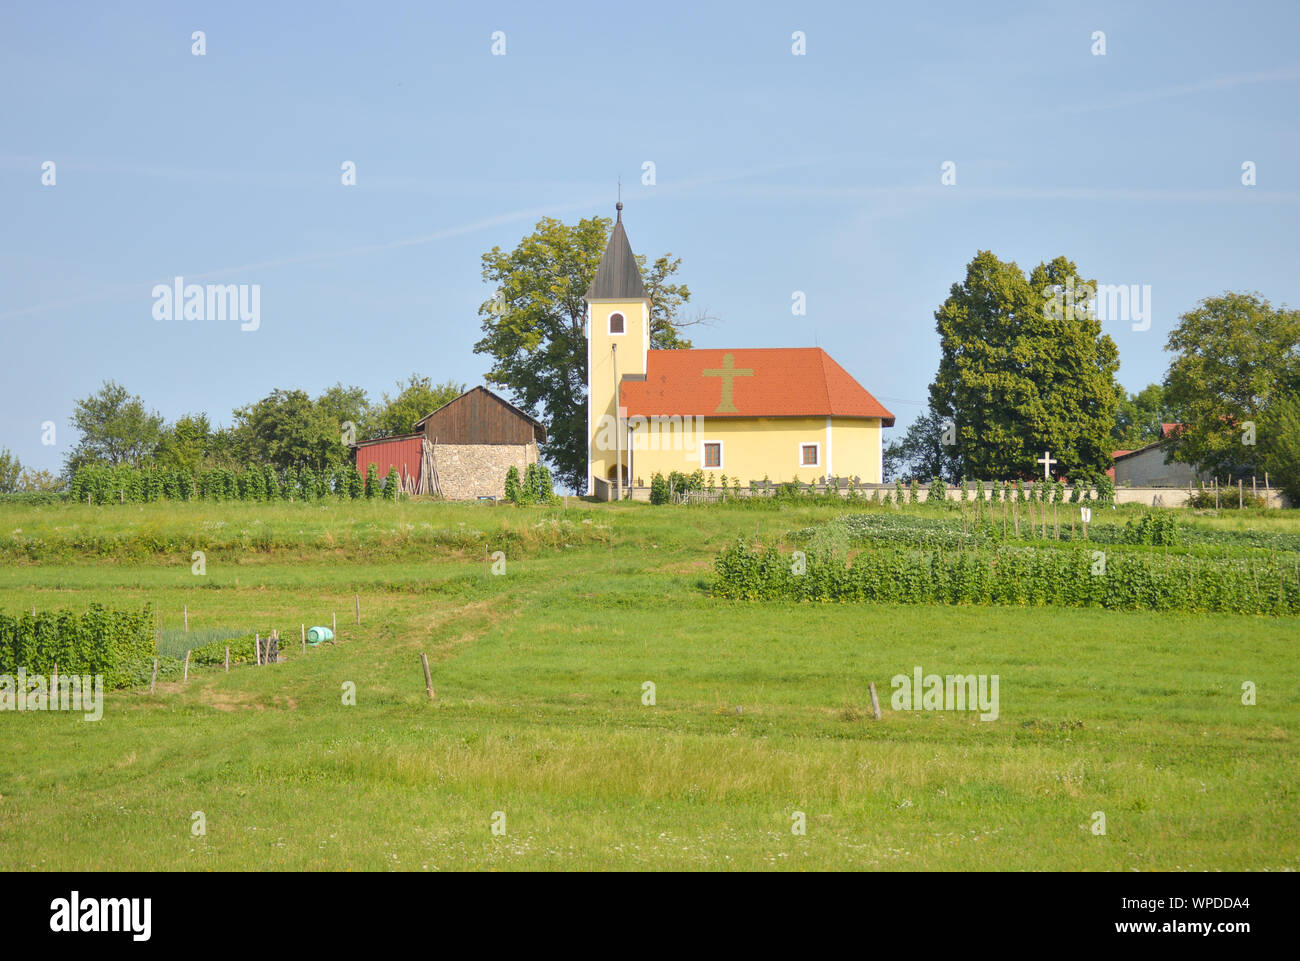 Village Dragonoš in Croatia, cultivated land, Church on top of hill Stock Photo